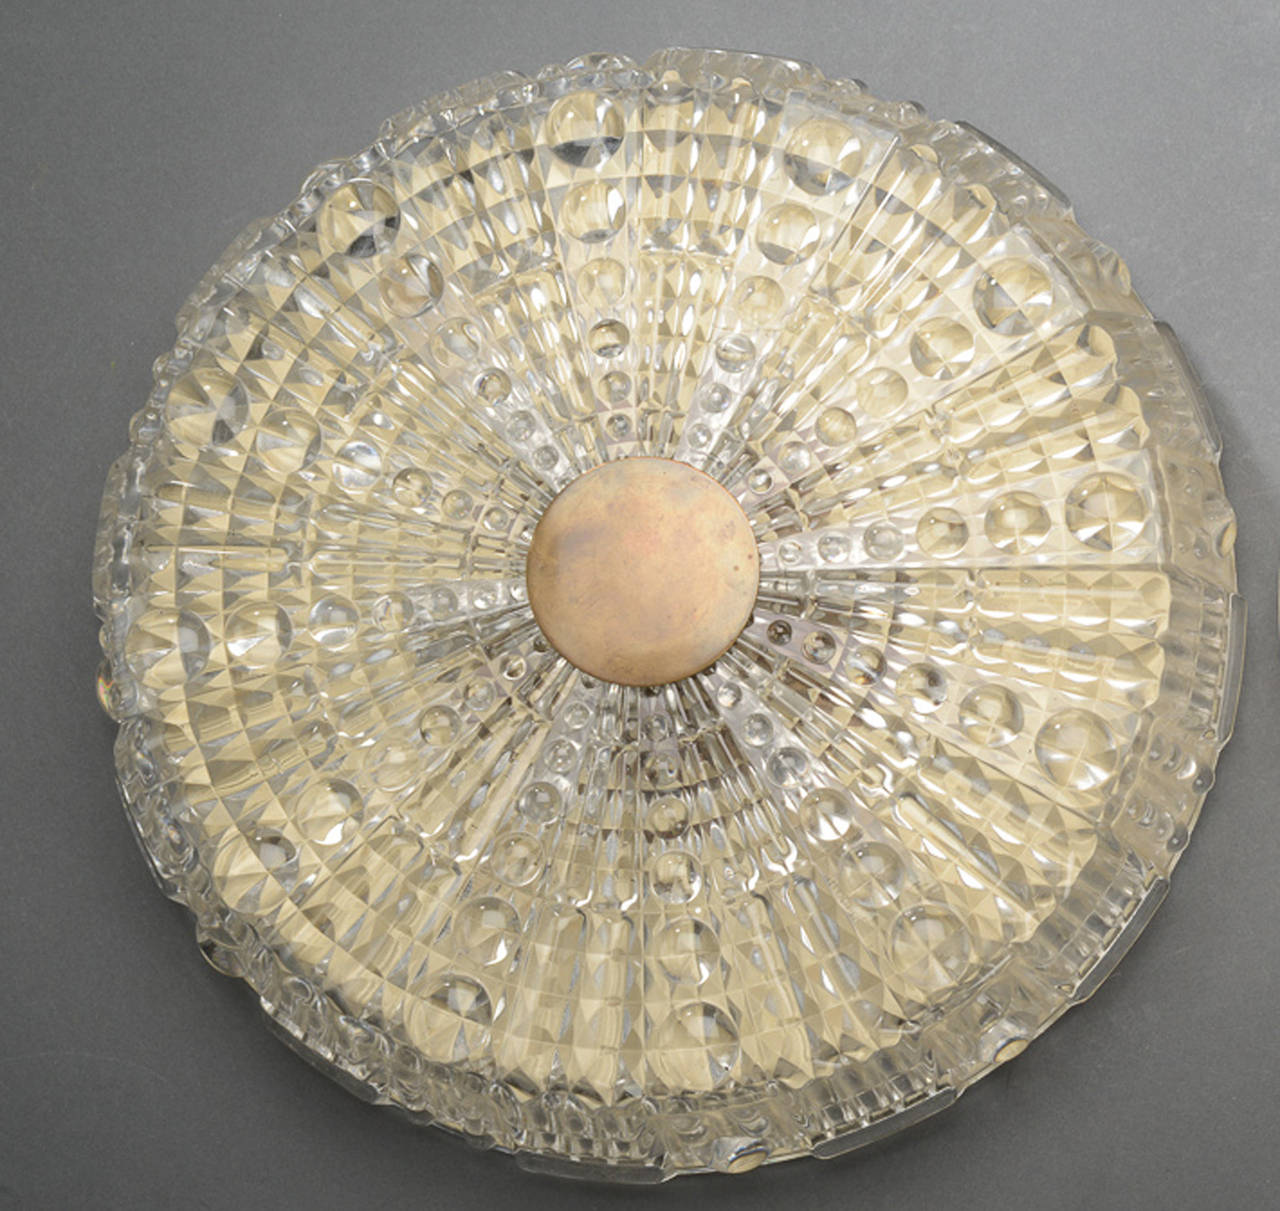 1950s-early 1960s brass-mounted pressed glass flush mount ceiling fixture designed by Carl Fagerlund for Orrefors of Sweden. Note: pair available.